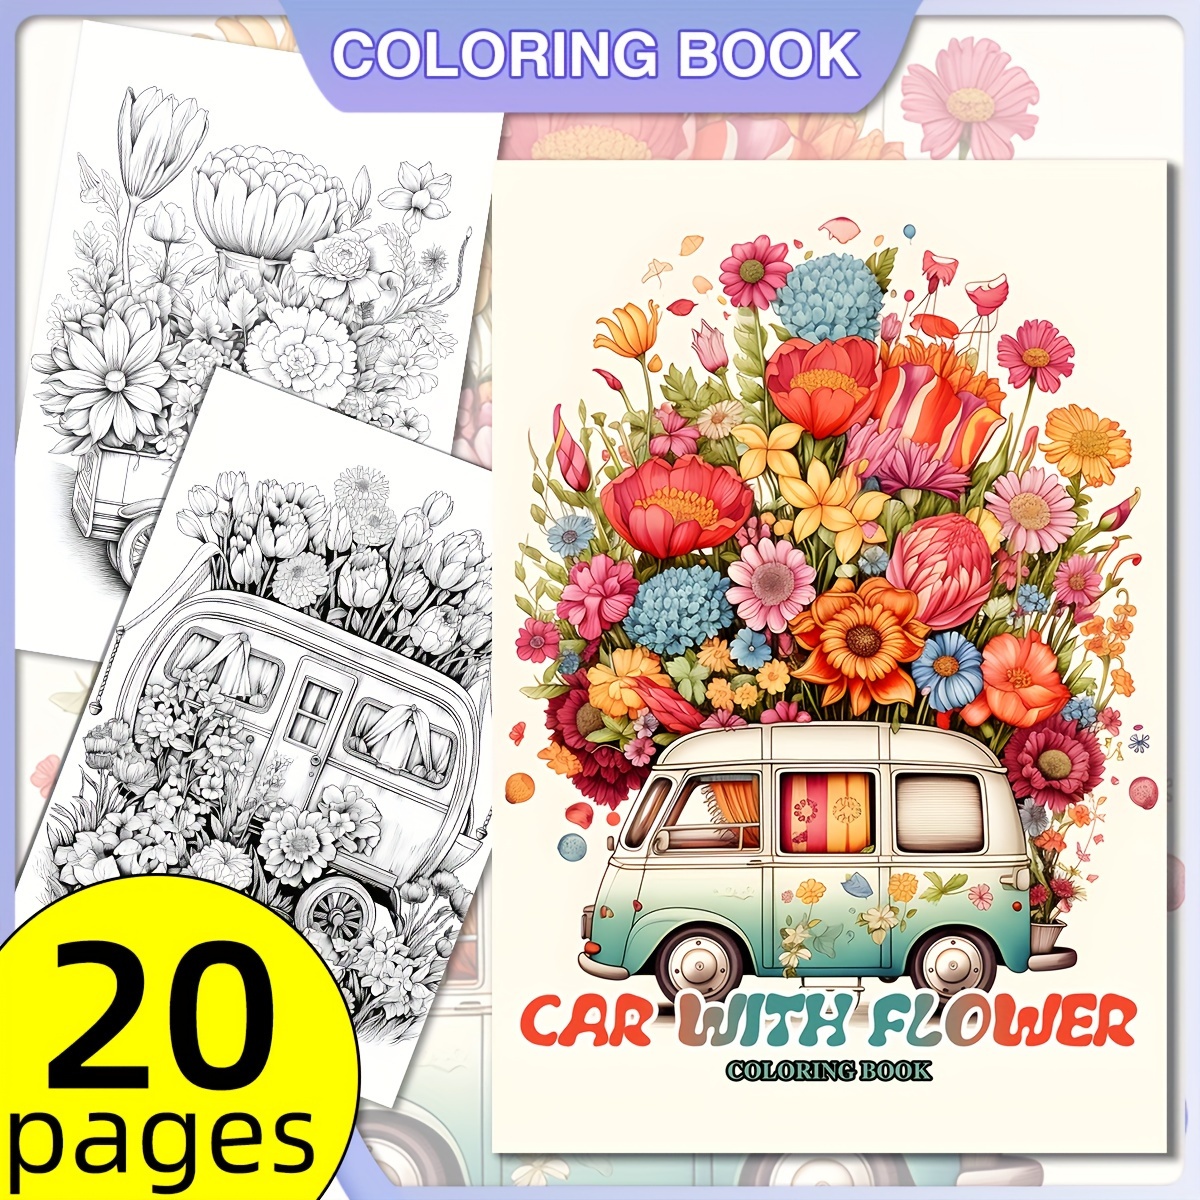 

Car With Flower Adult Coloring Book: 20 Pages, Thick Paper, Perfect For Enduring Creativity - Ideal Holiday & New Year's Gift For Friends, Couples, And Family